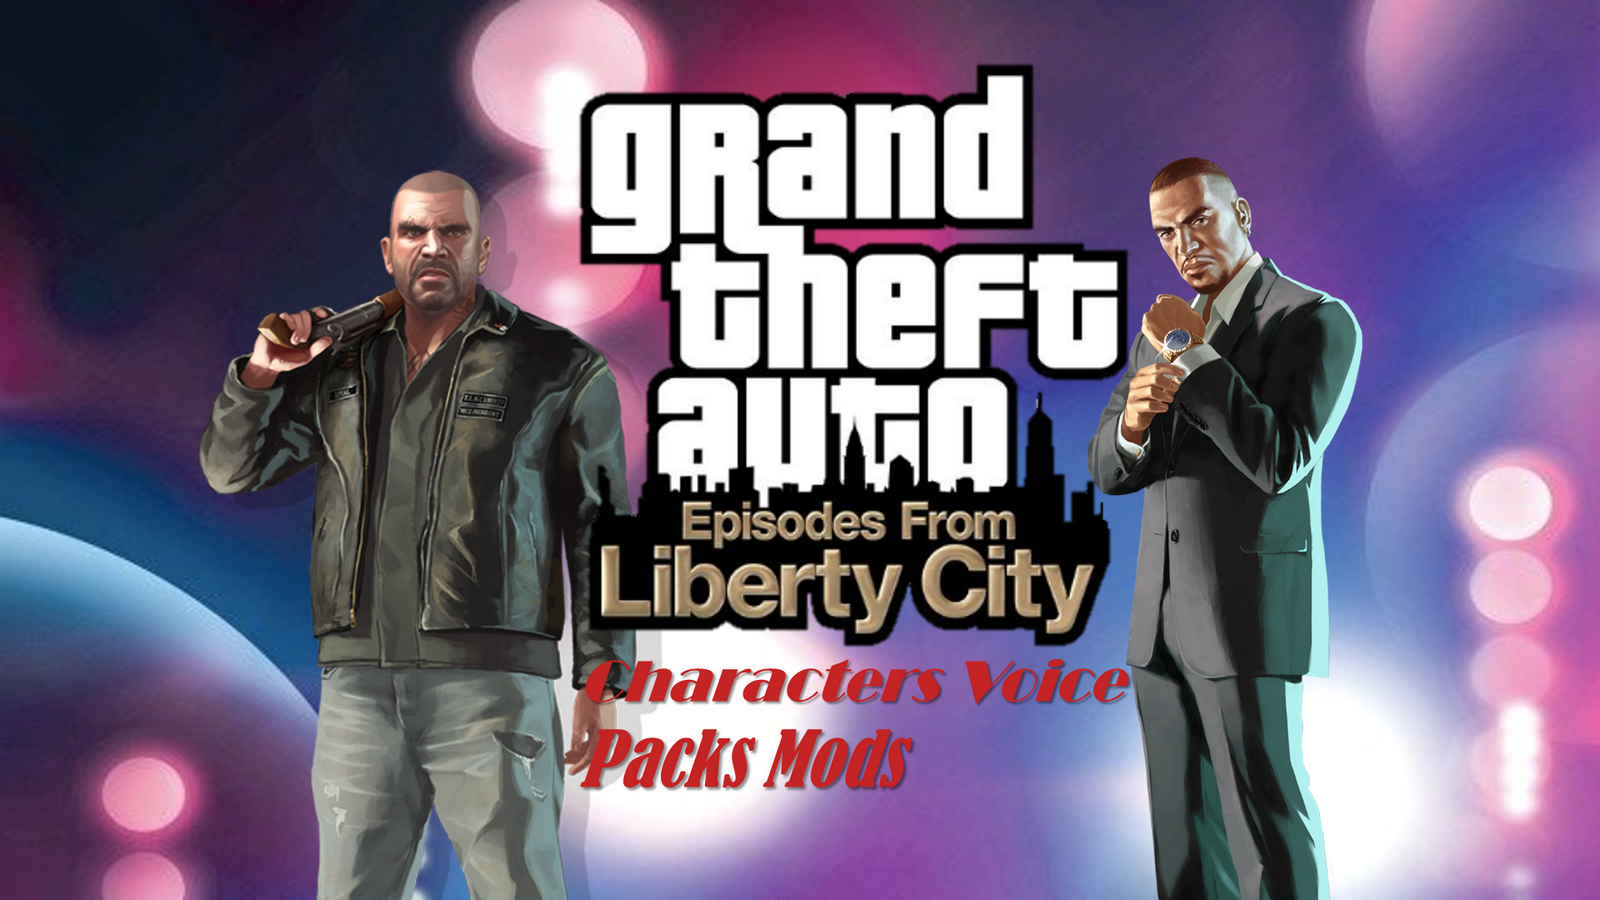 EFLC Vehicle Addon Pack For GTA IV (With Proper Audio and Naming